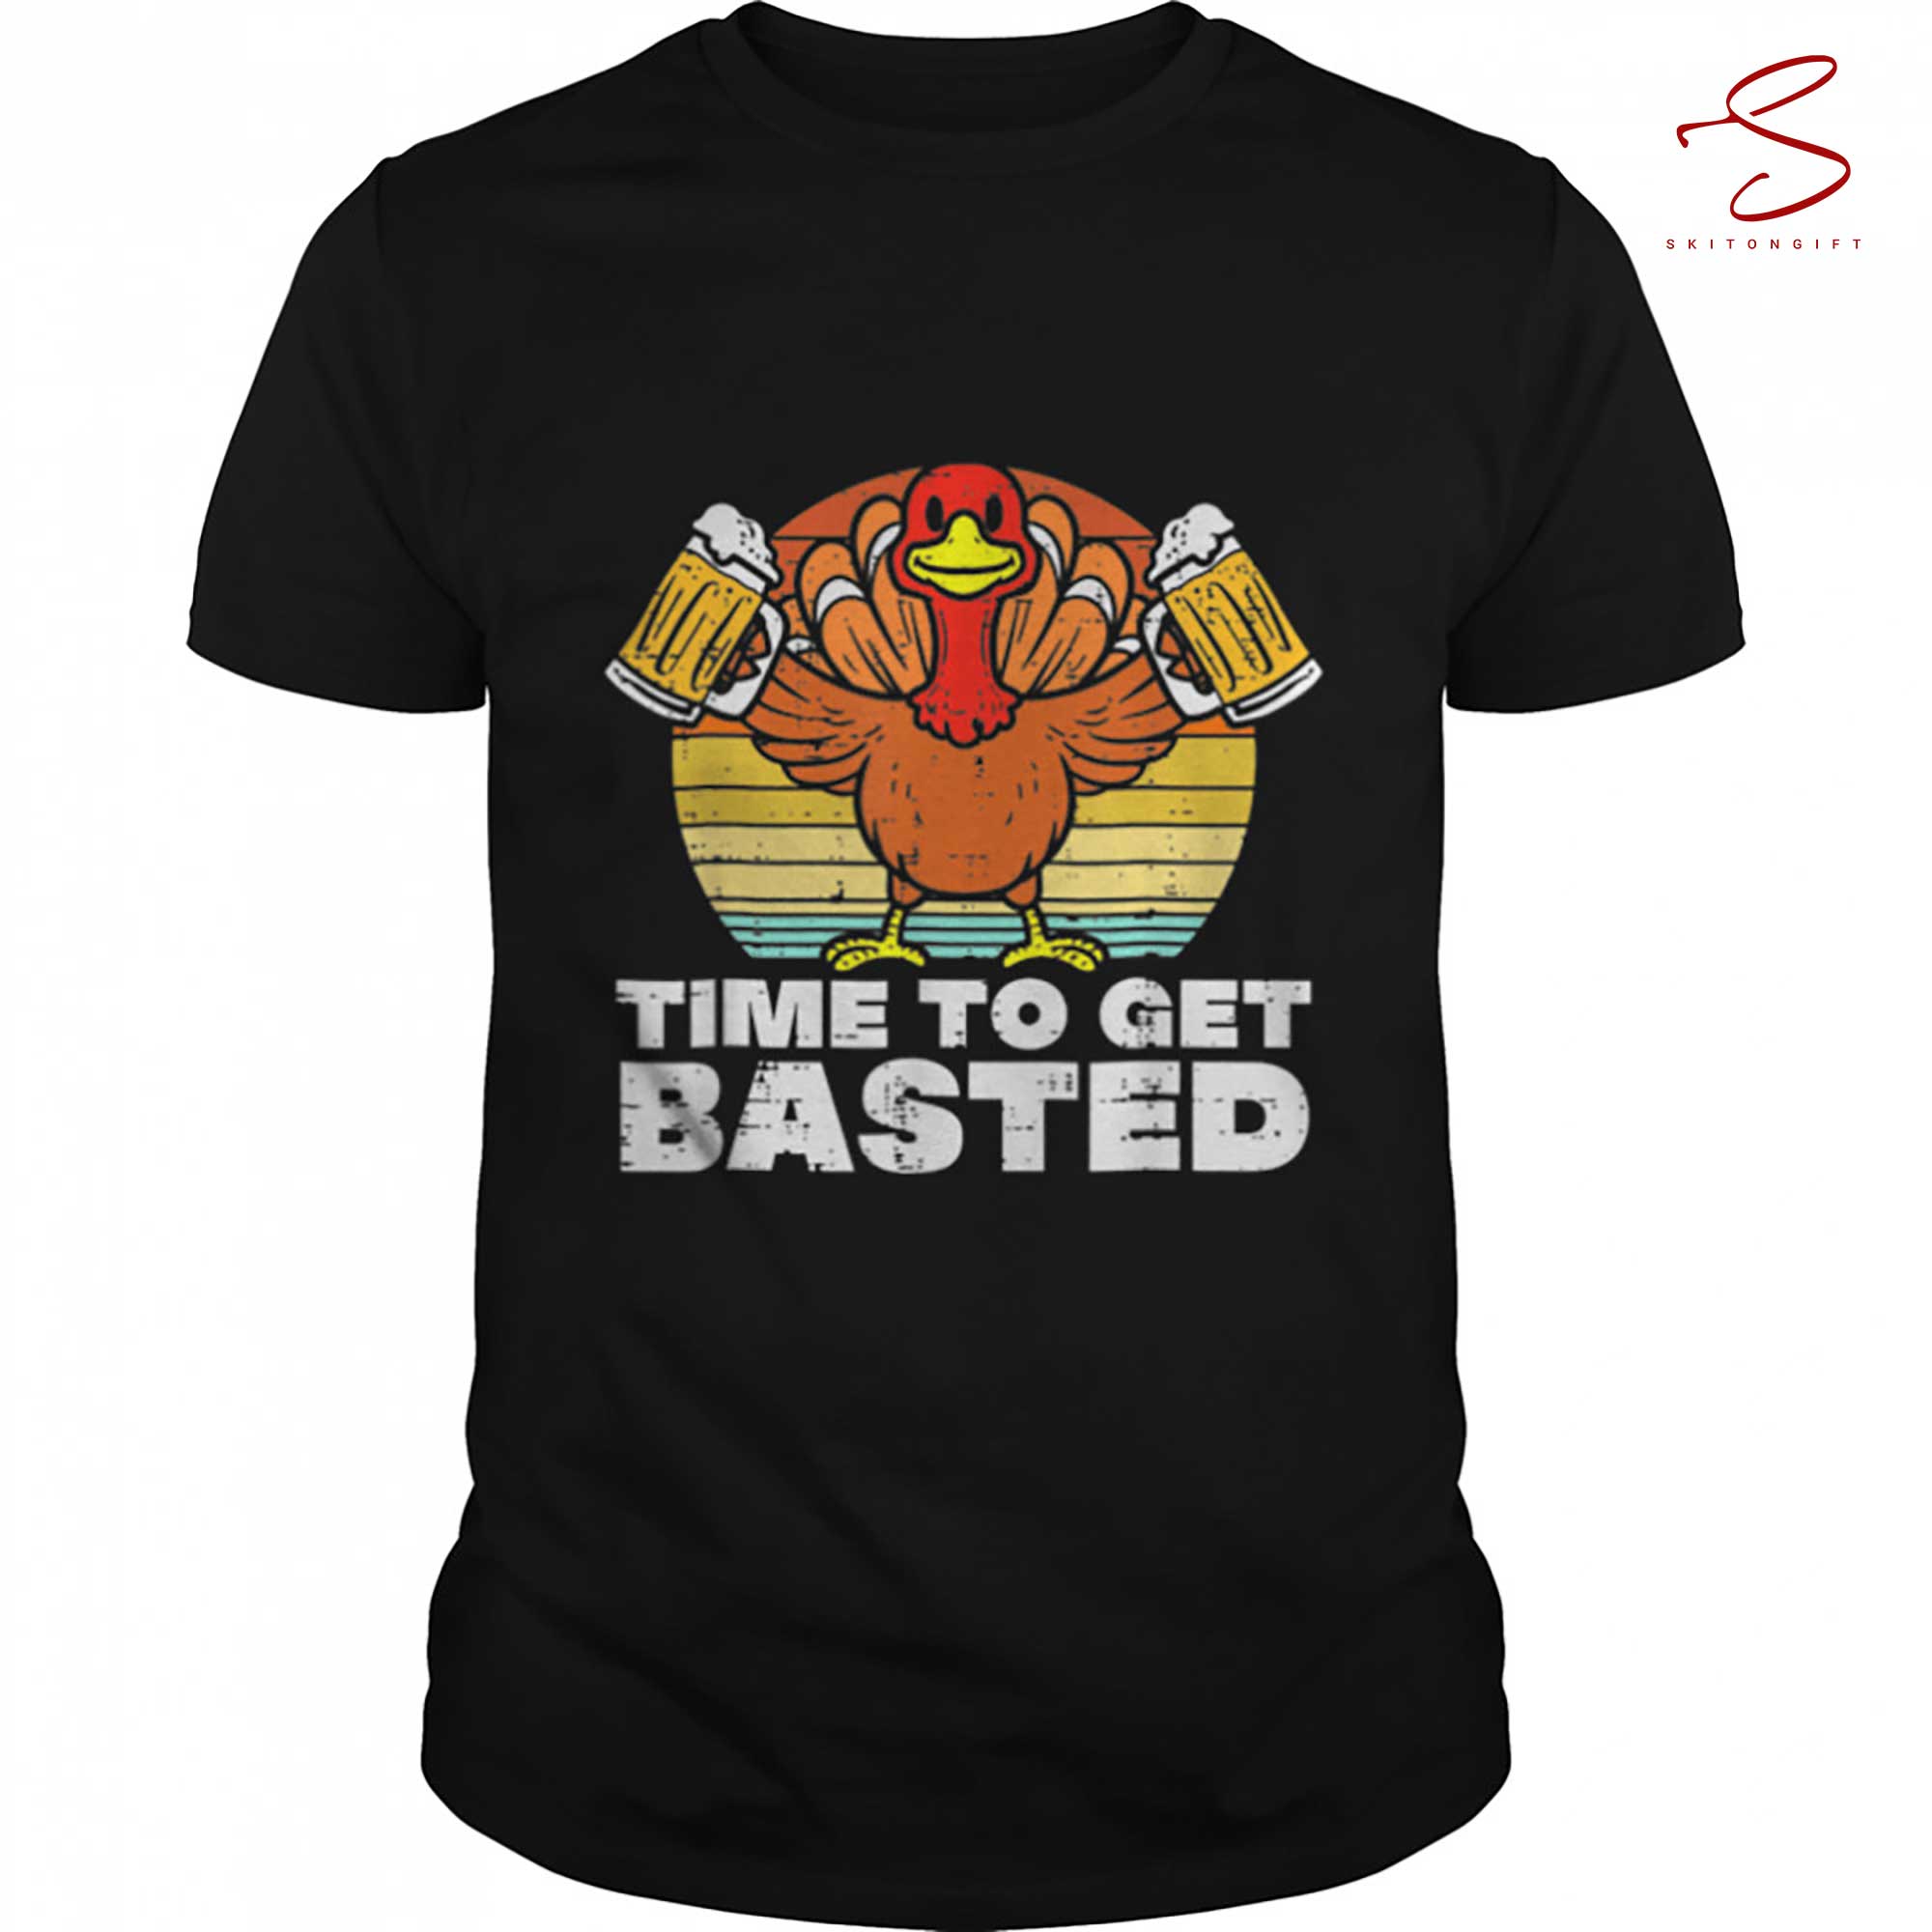 Skitongift Turkey Time To Get Basted Retro Happy Thanksgiving Food Fan T Shirt Funny Shirts Long Sleeve Tee Hoody Hoodie